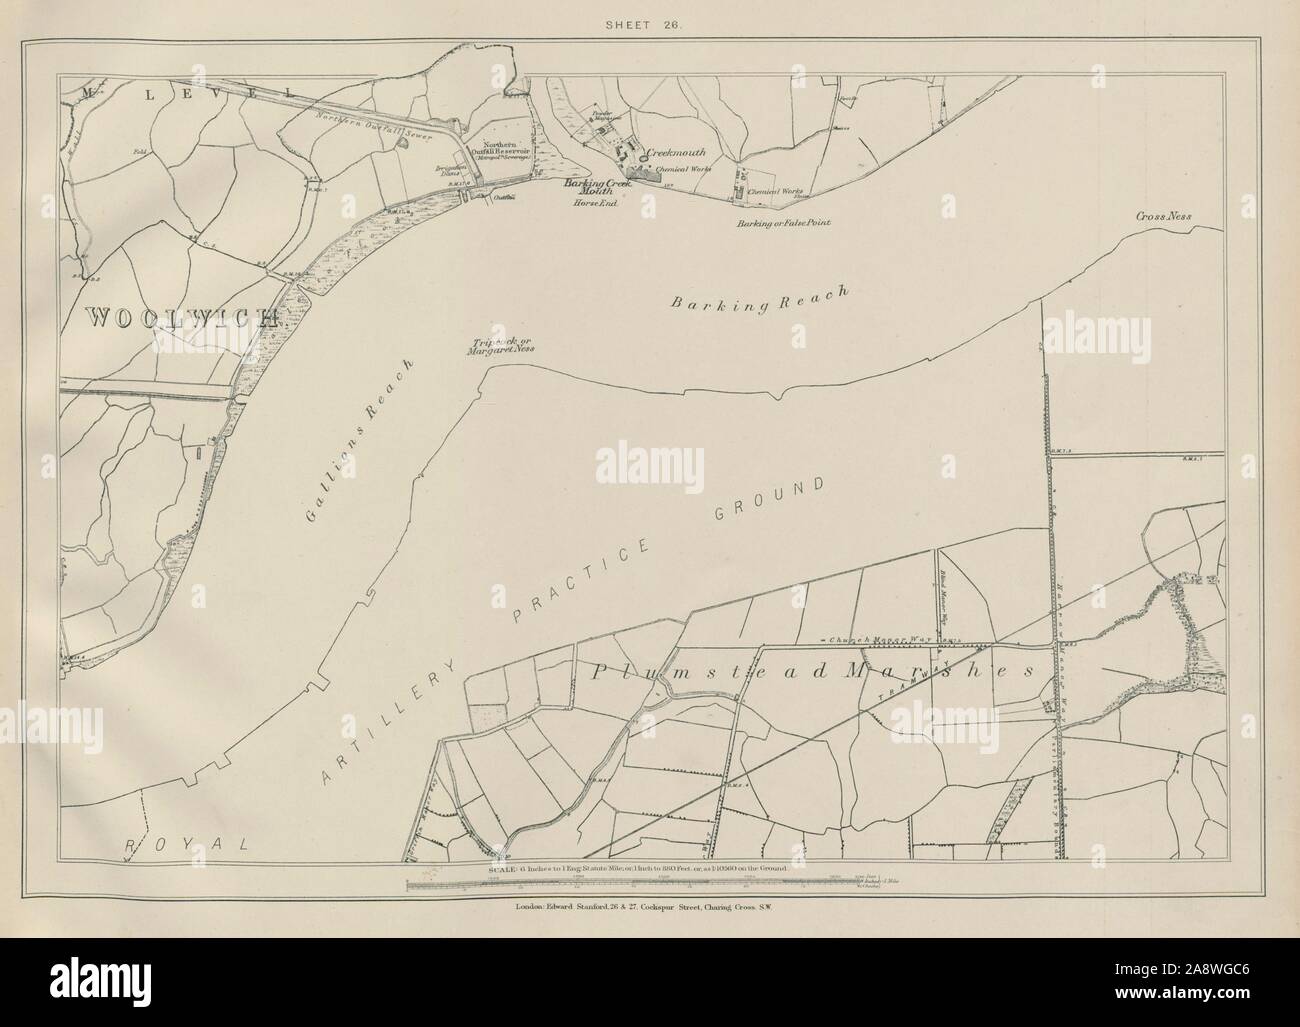 Stanford Library map of London Sheet 26 Woolwich Beckton Thamesmead 1895 Stock Photo